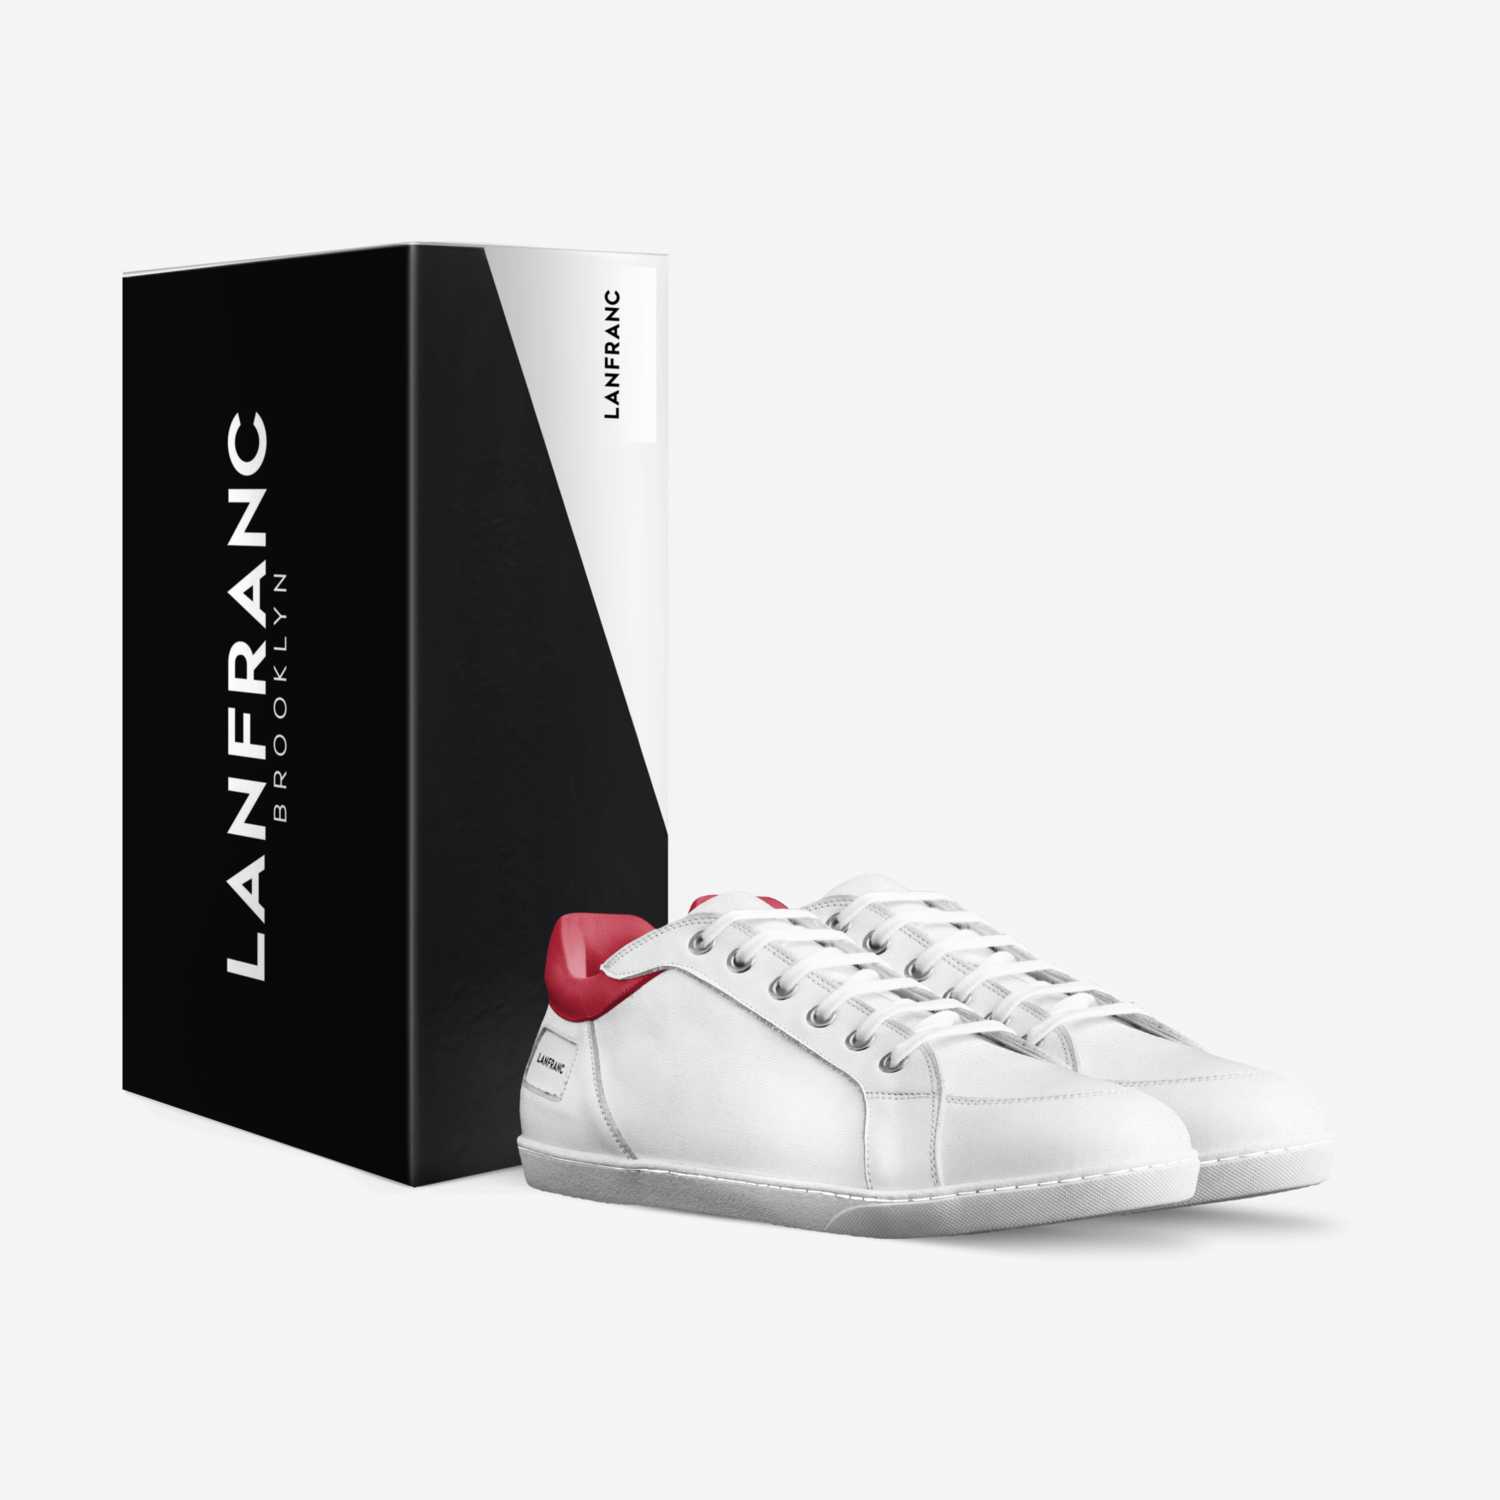 LFC LTx01 custom made in Italy shoes by Guillaume Jamet | Box view